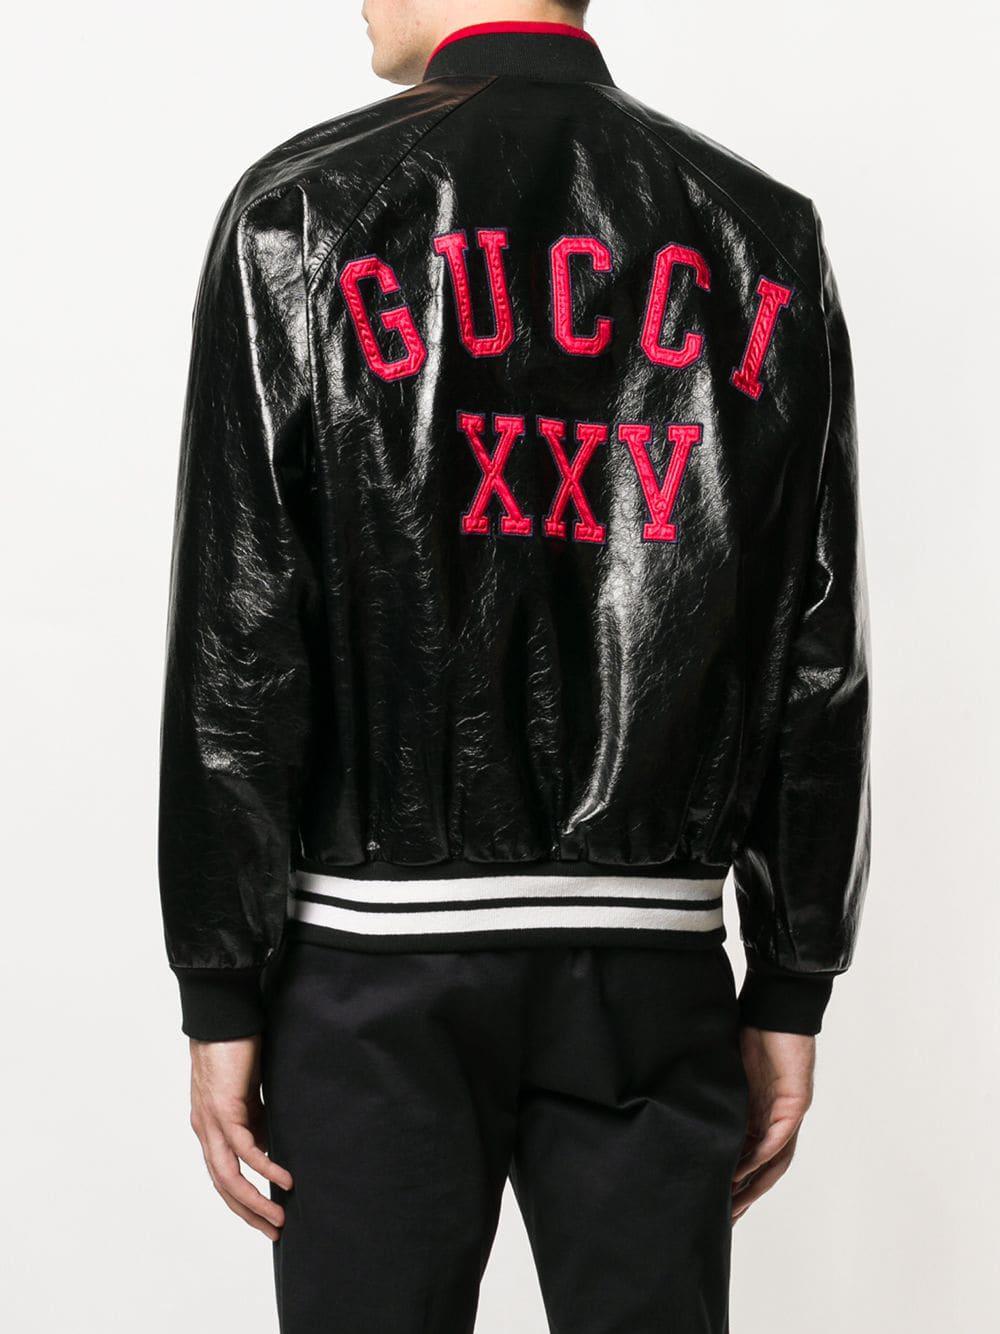 Gucci Synthetic Ny Yankees Bomber Jacket in Black for Men - Lyst